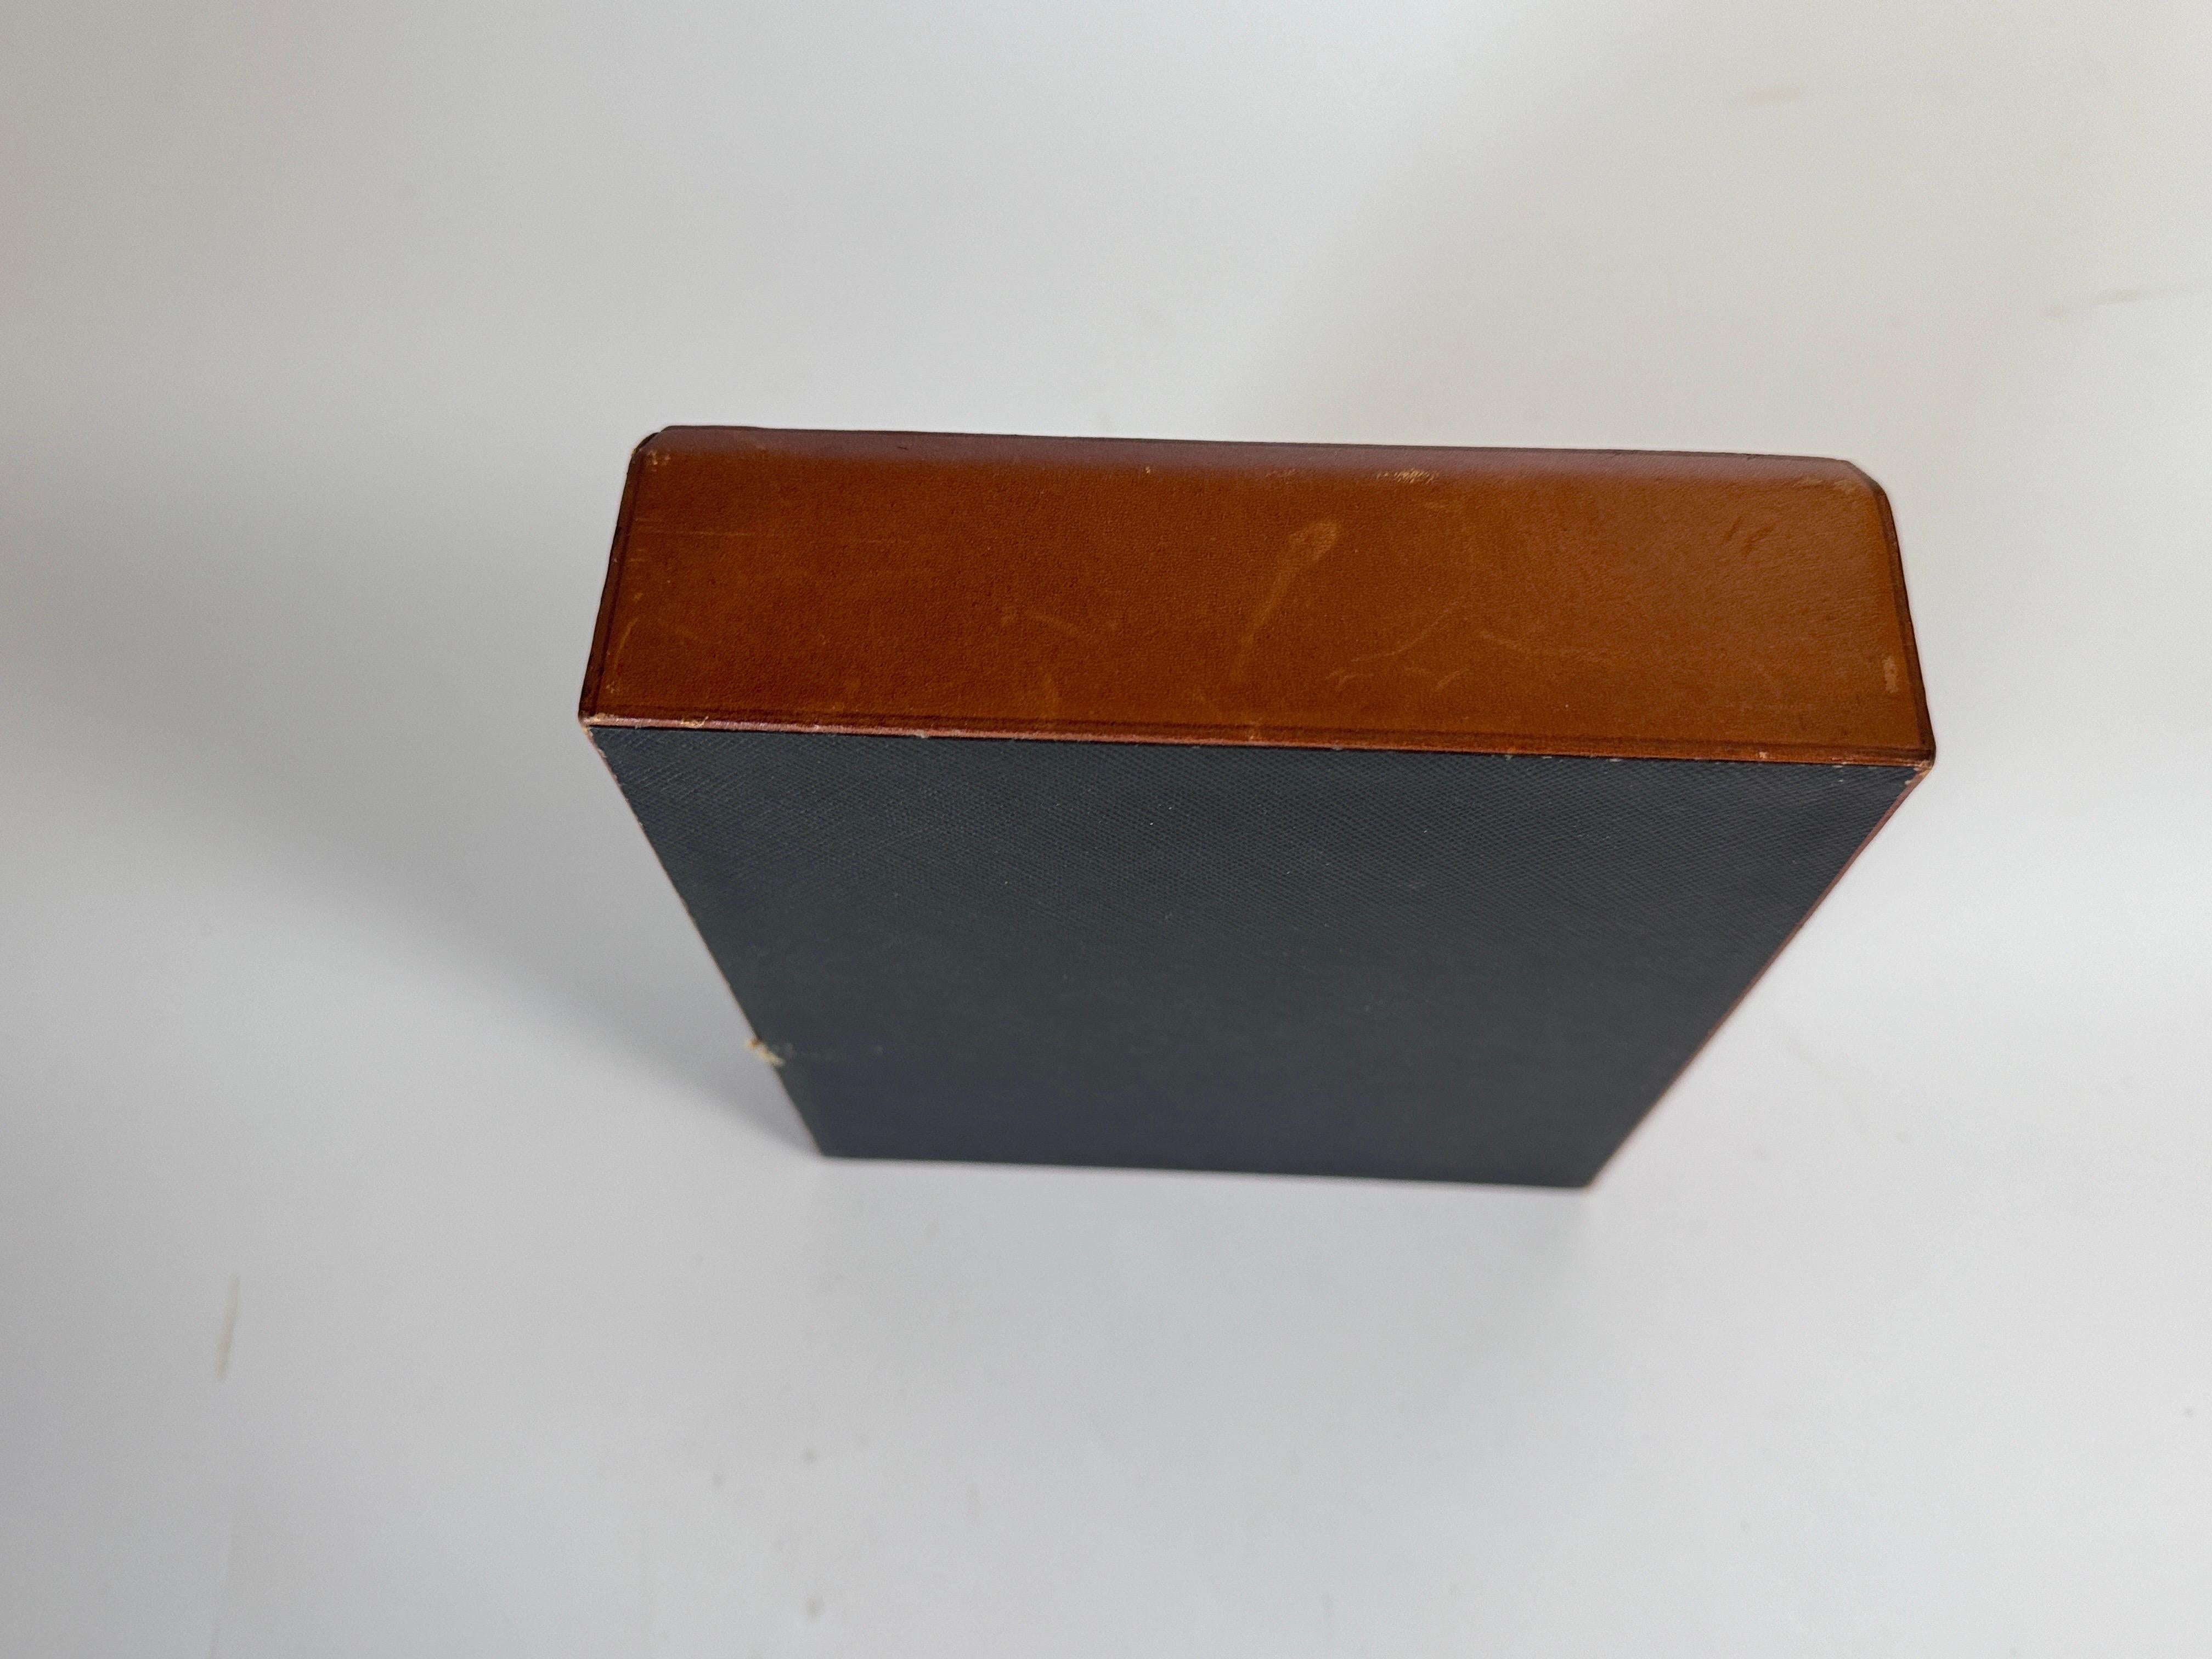 Leather Covered Tobacco Box Wood Brown Jacques Adnet Style France 1940 by Lancel For Sale 1